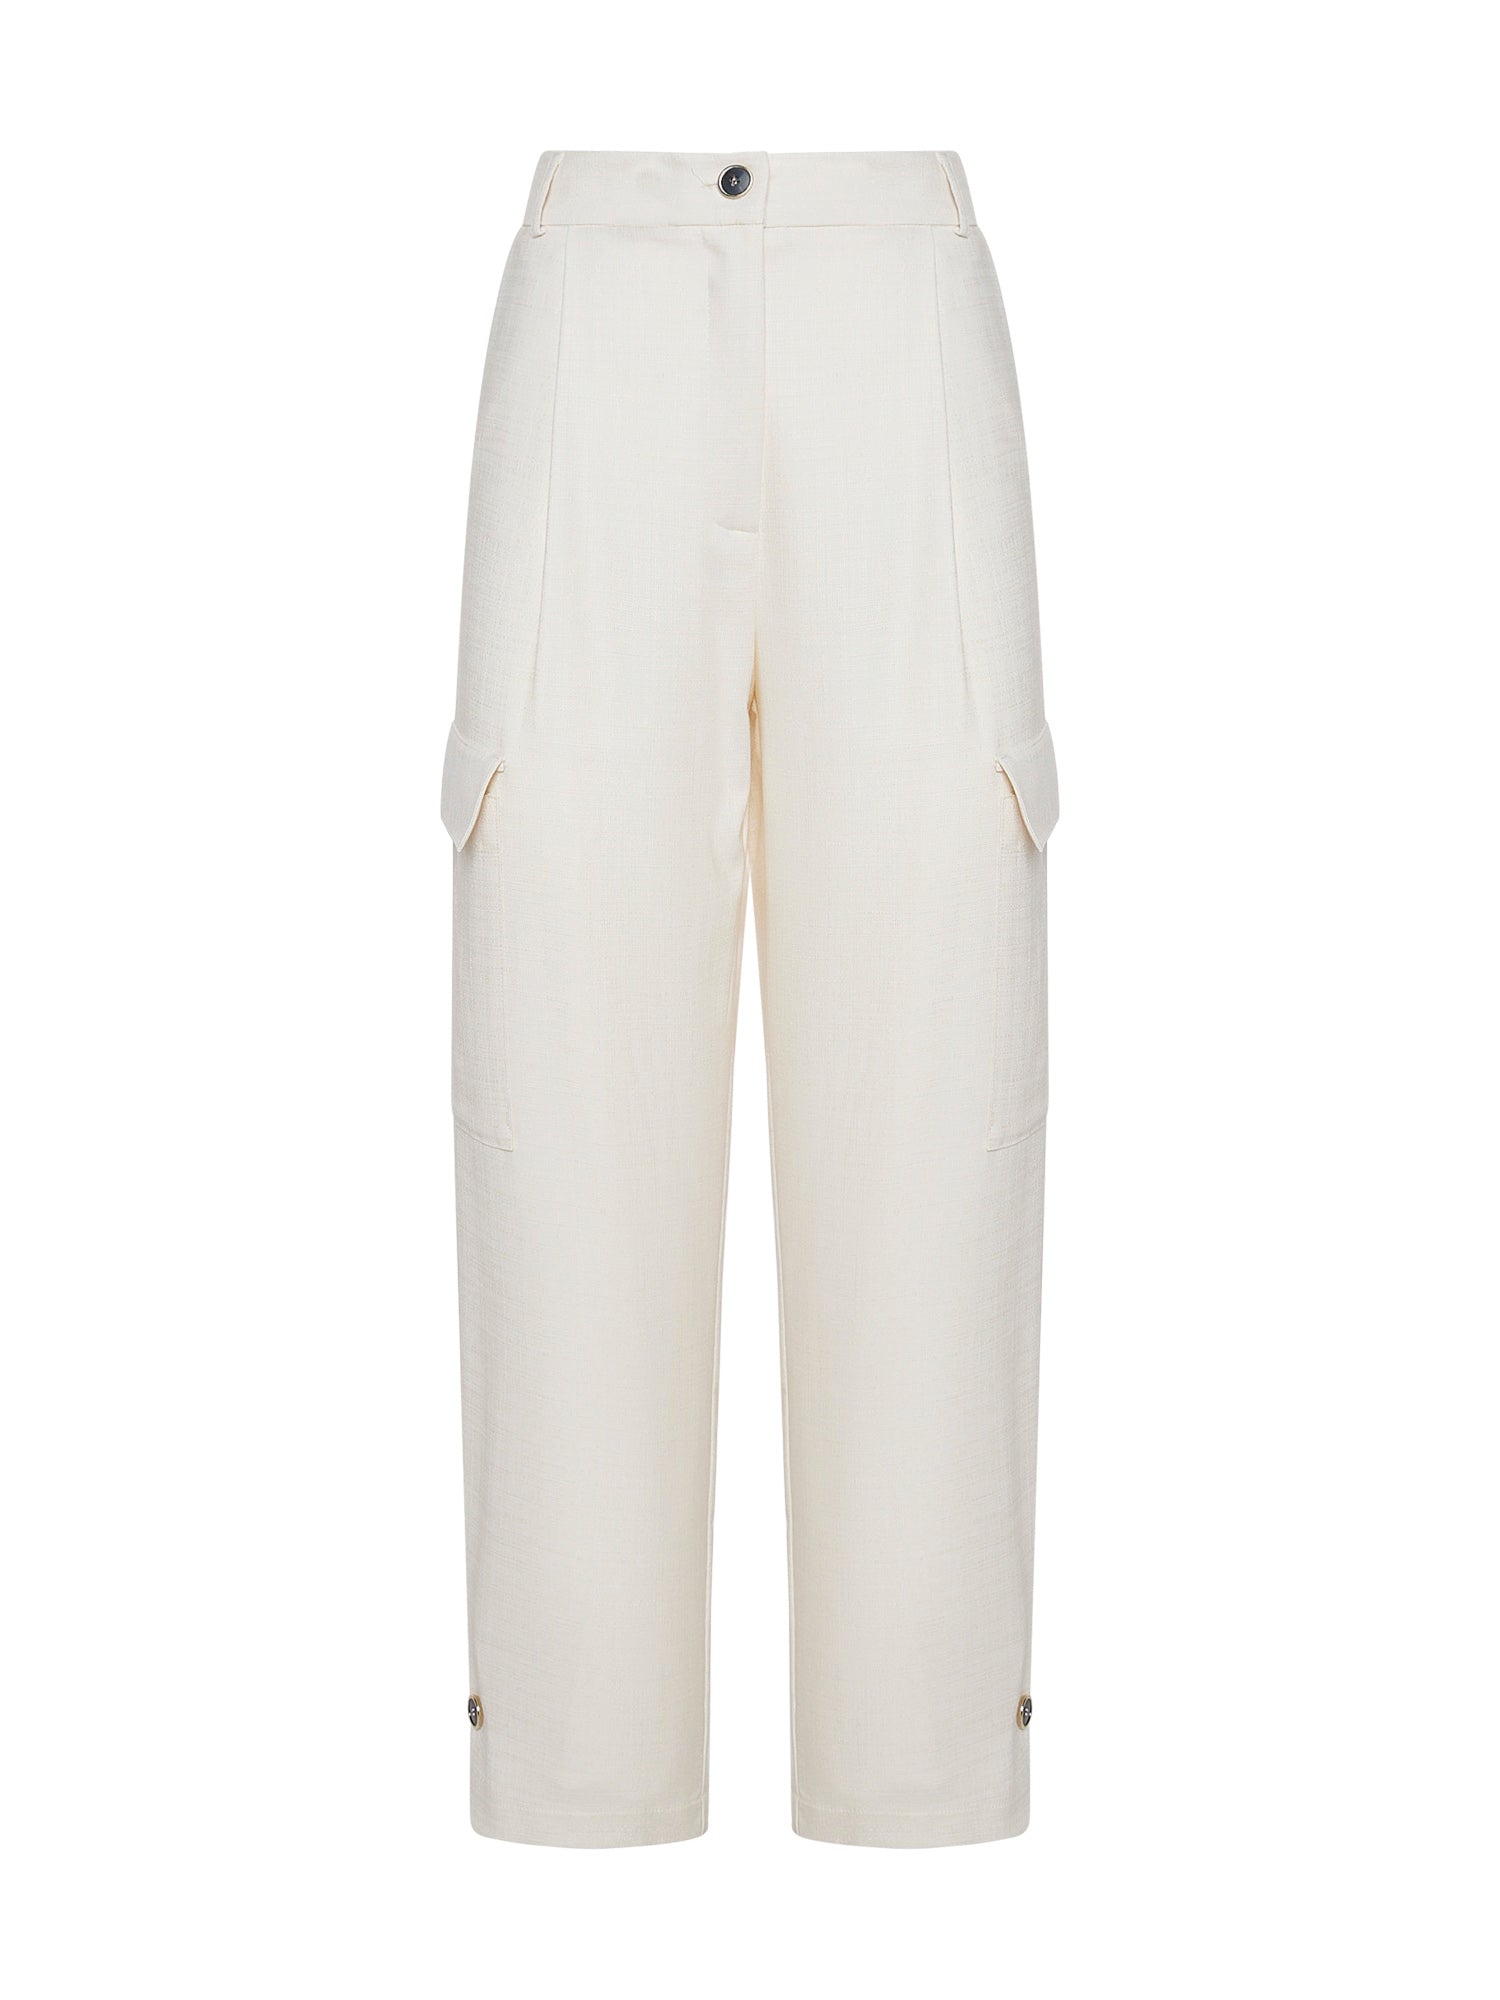 Luxury textured fabric cargo trousers